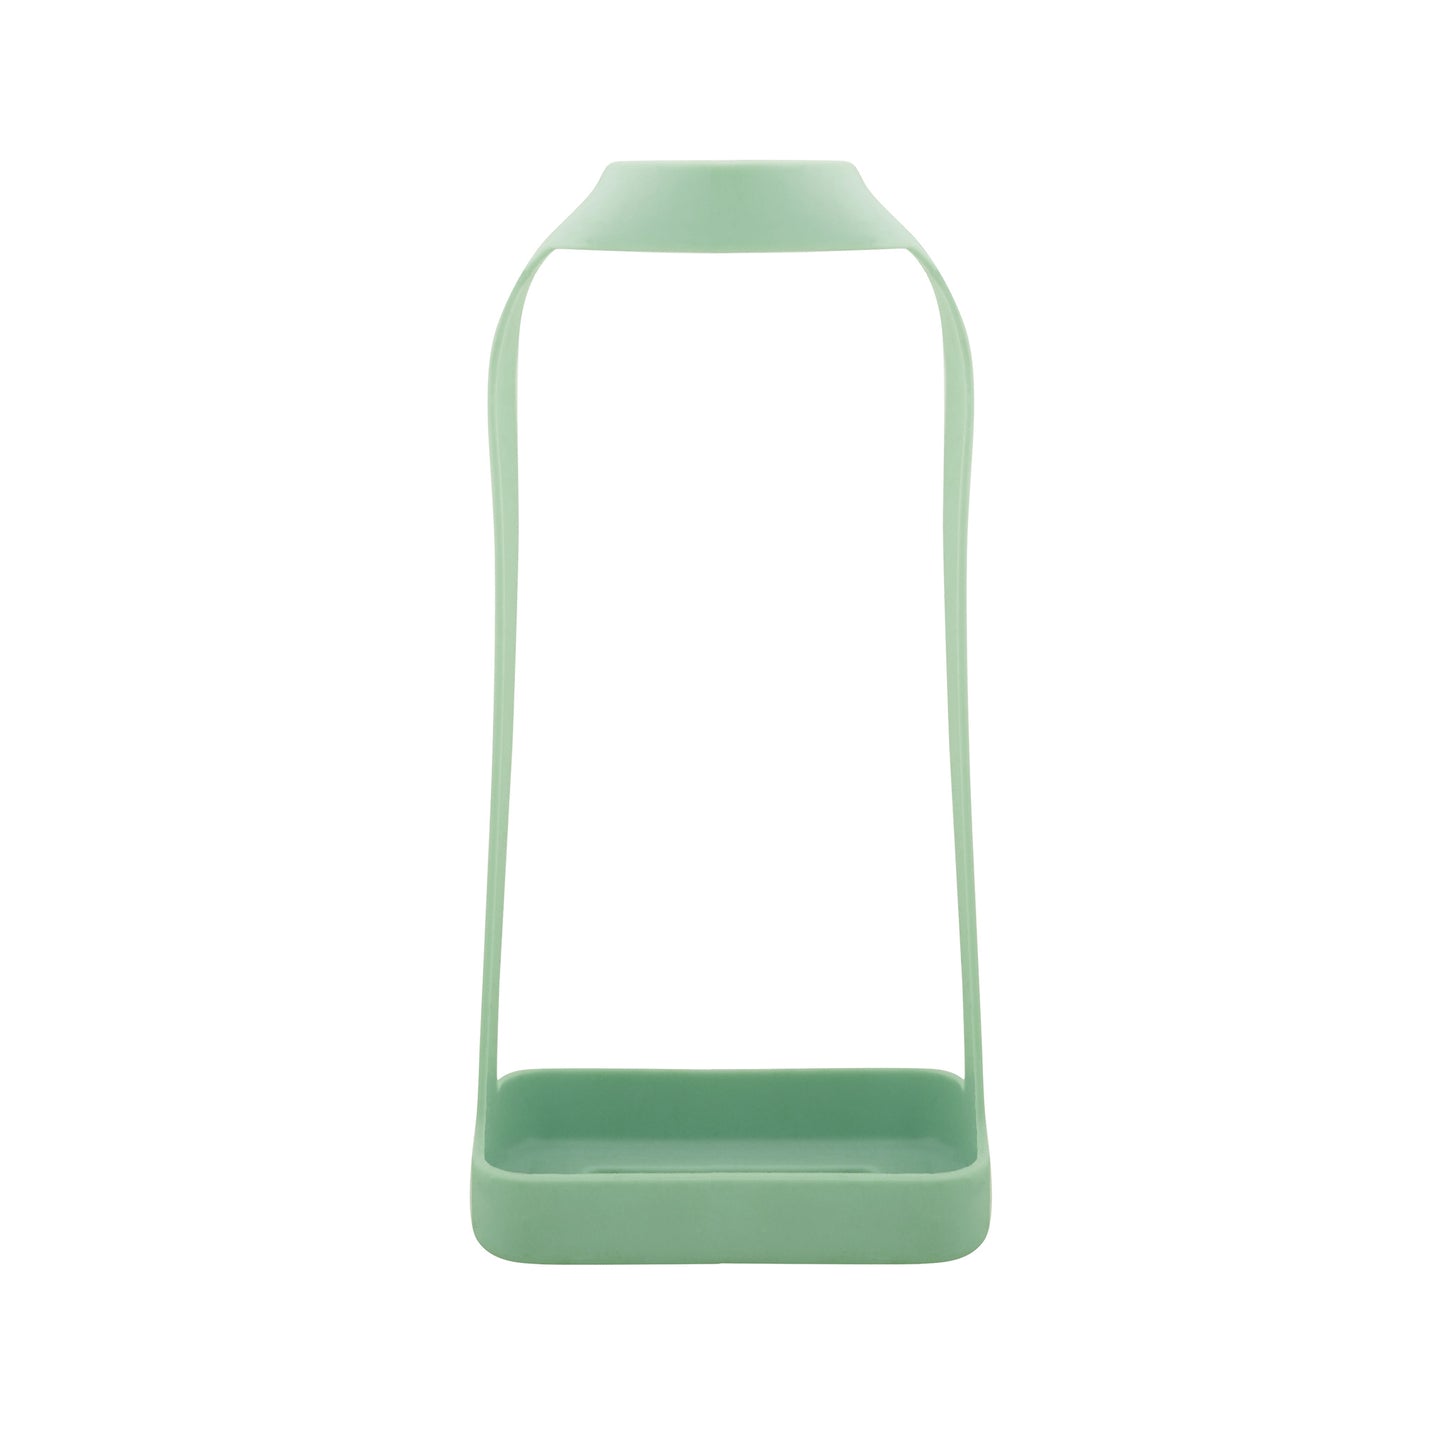 Feinsam protective cover mint